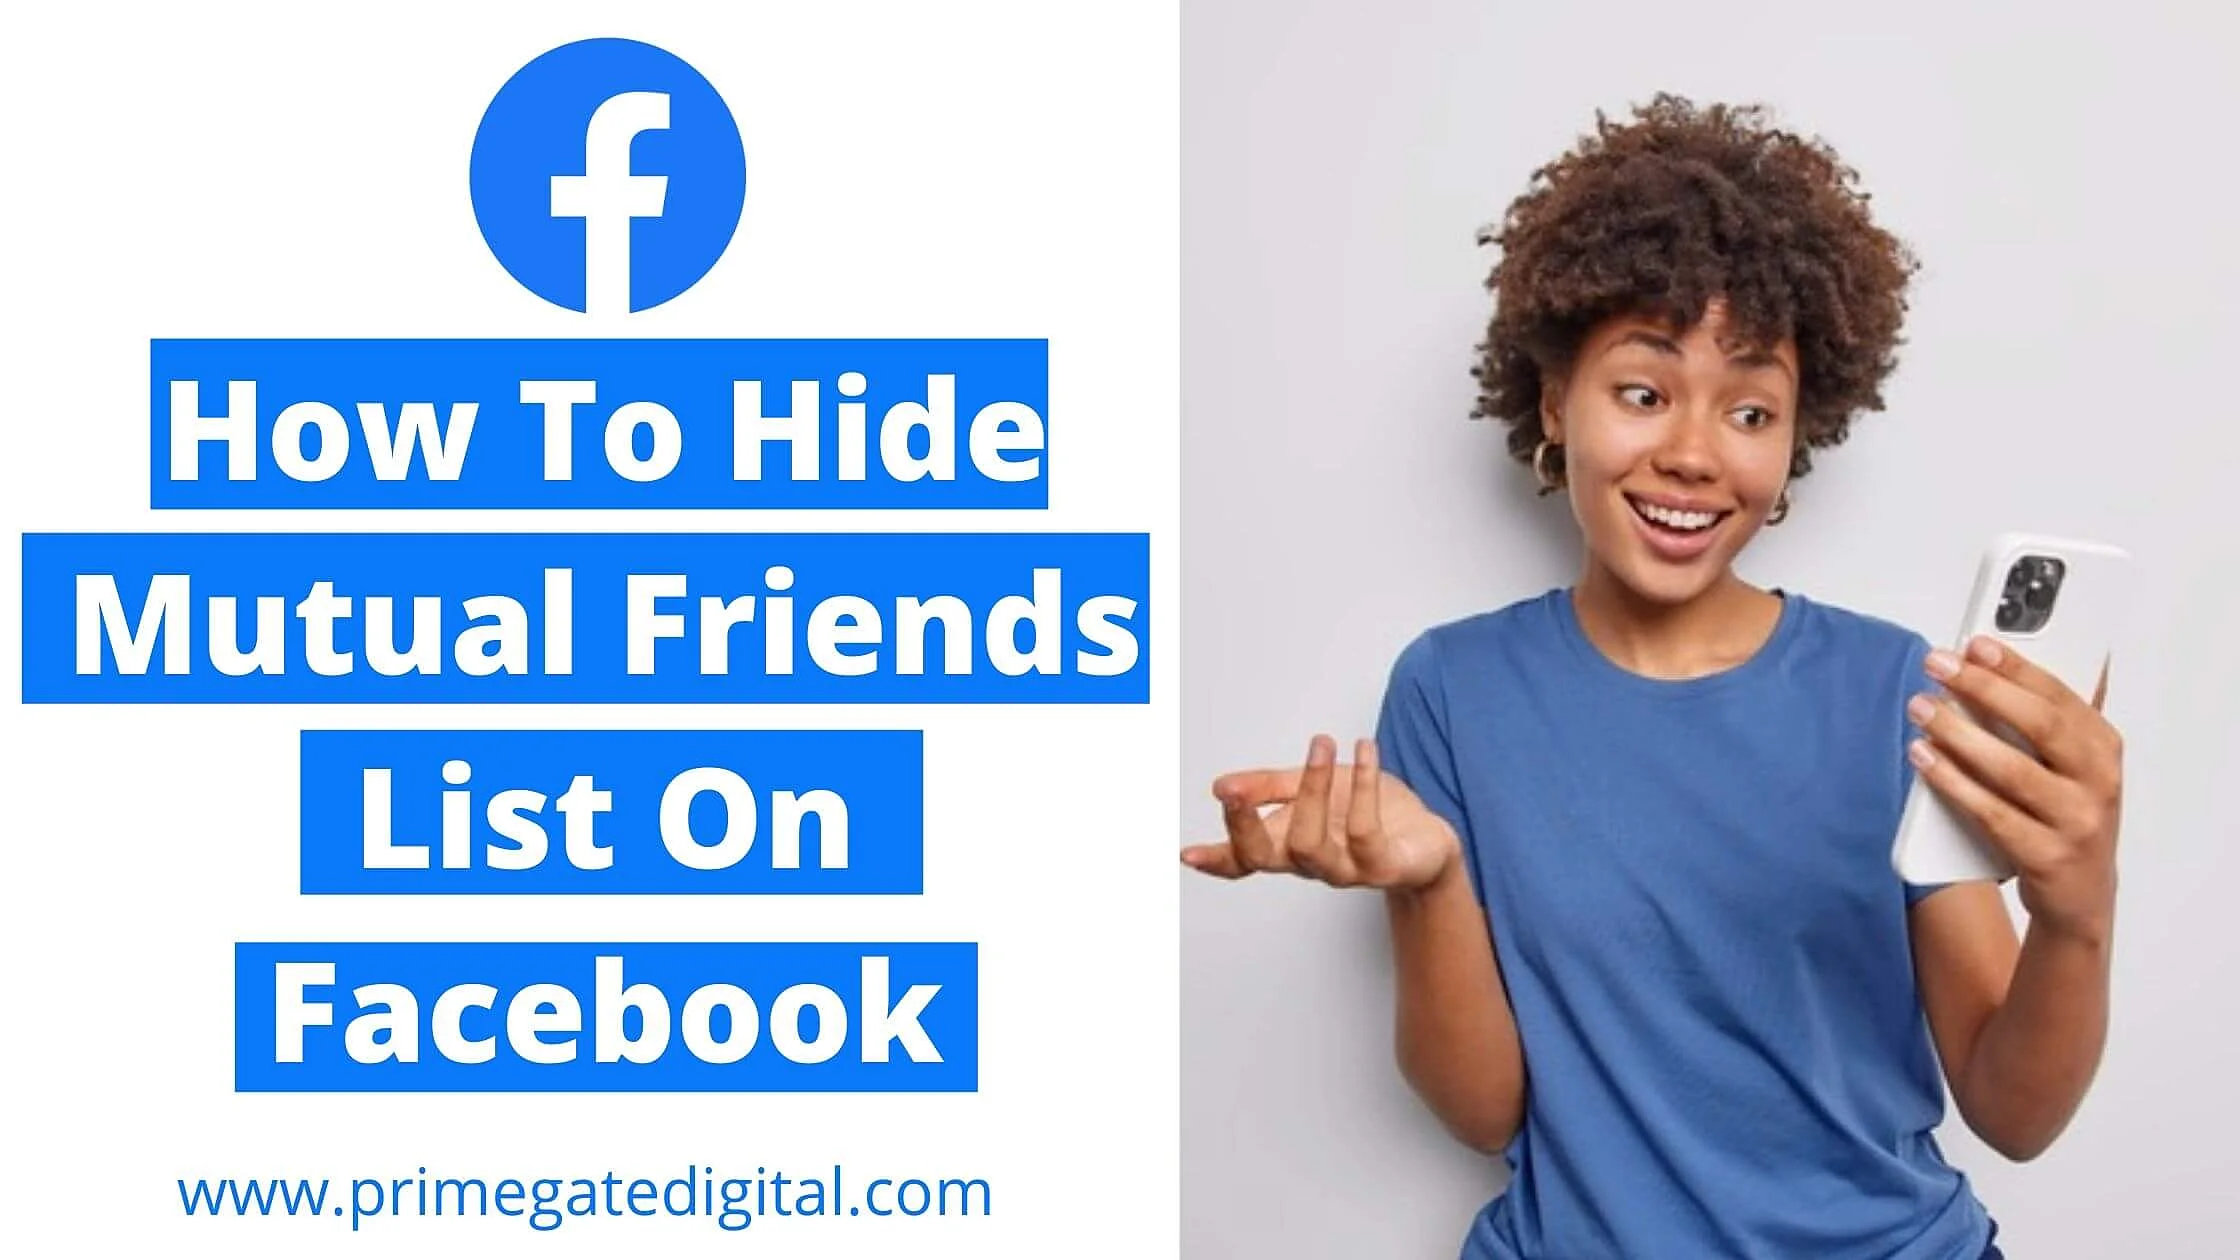 How To Hide Mutual Friends List On Facebook